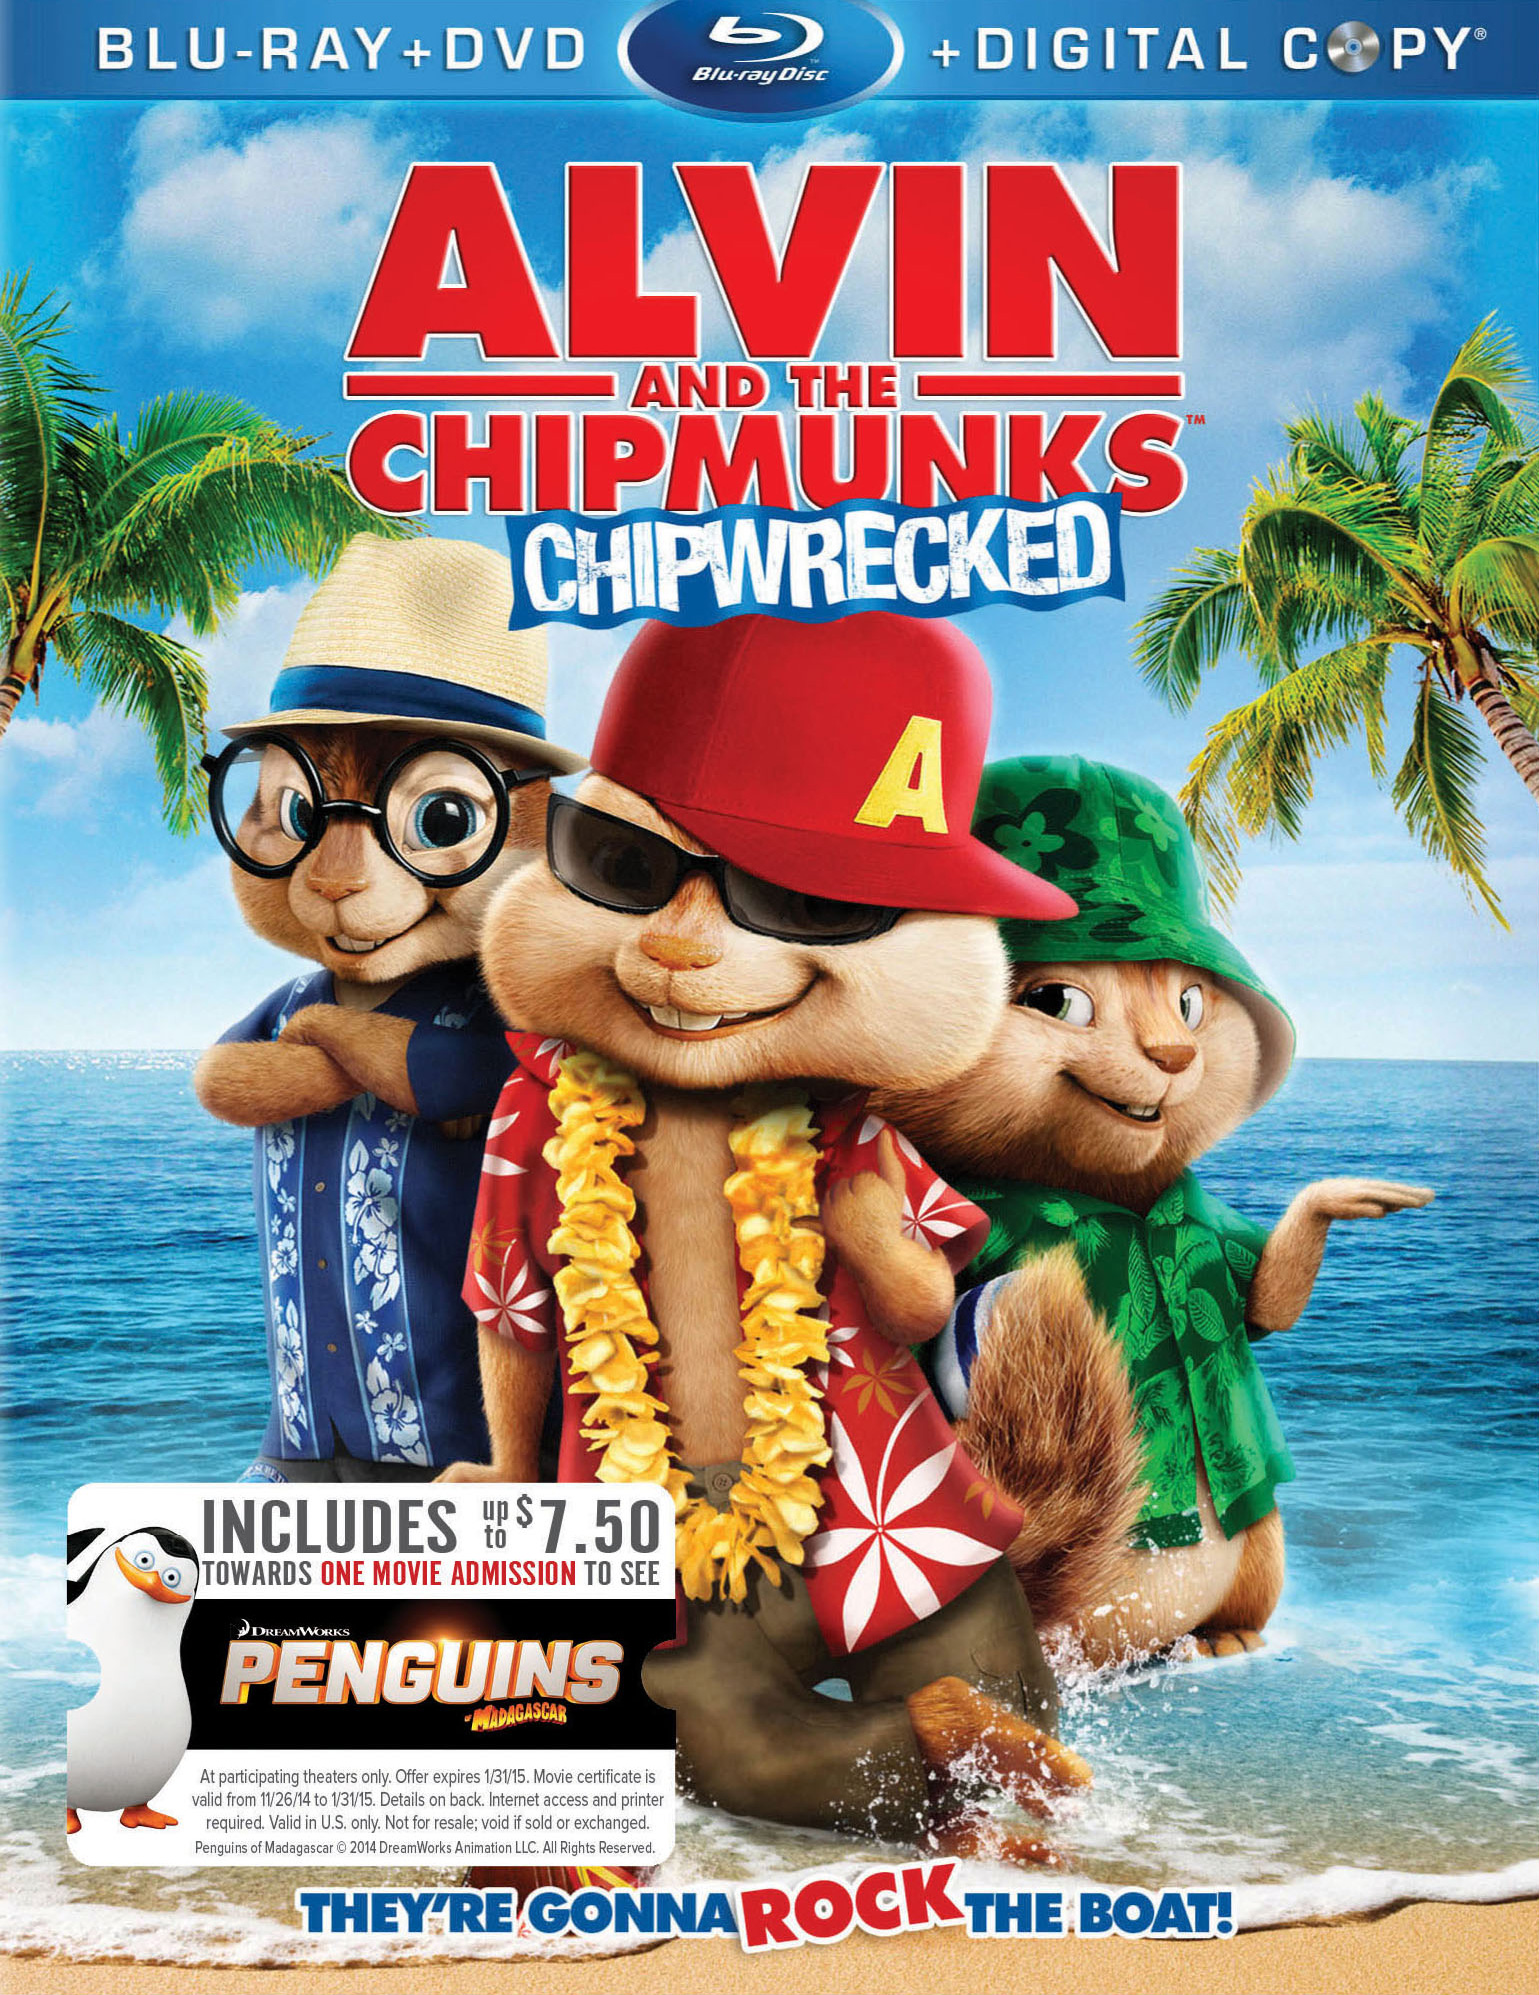 Alvin and the Chipmunks: Chipwrecked [Includes Digital Copy] [Blu-ray/DVD]  [Movie Money] [2011] - Best Buy